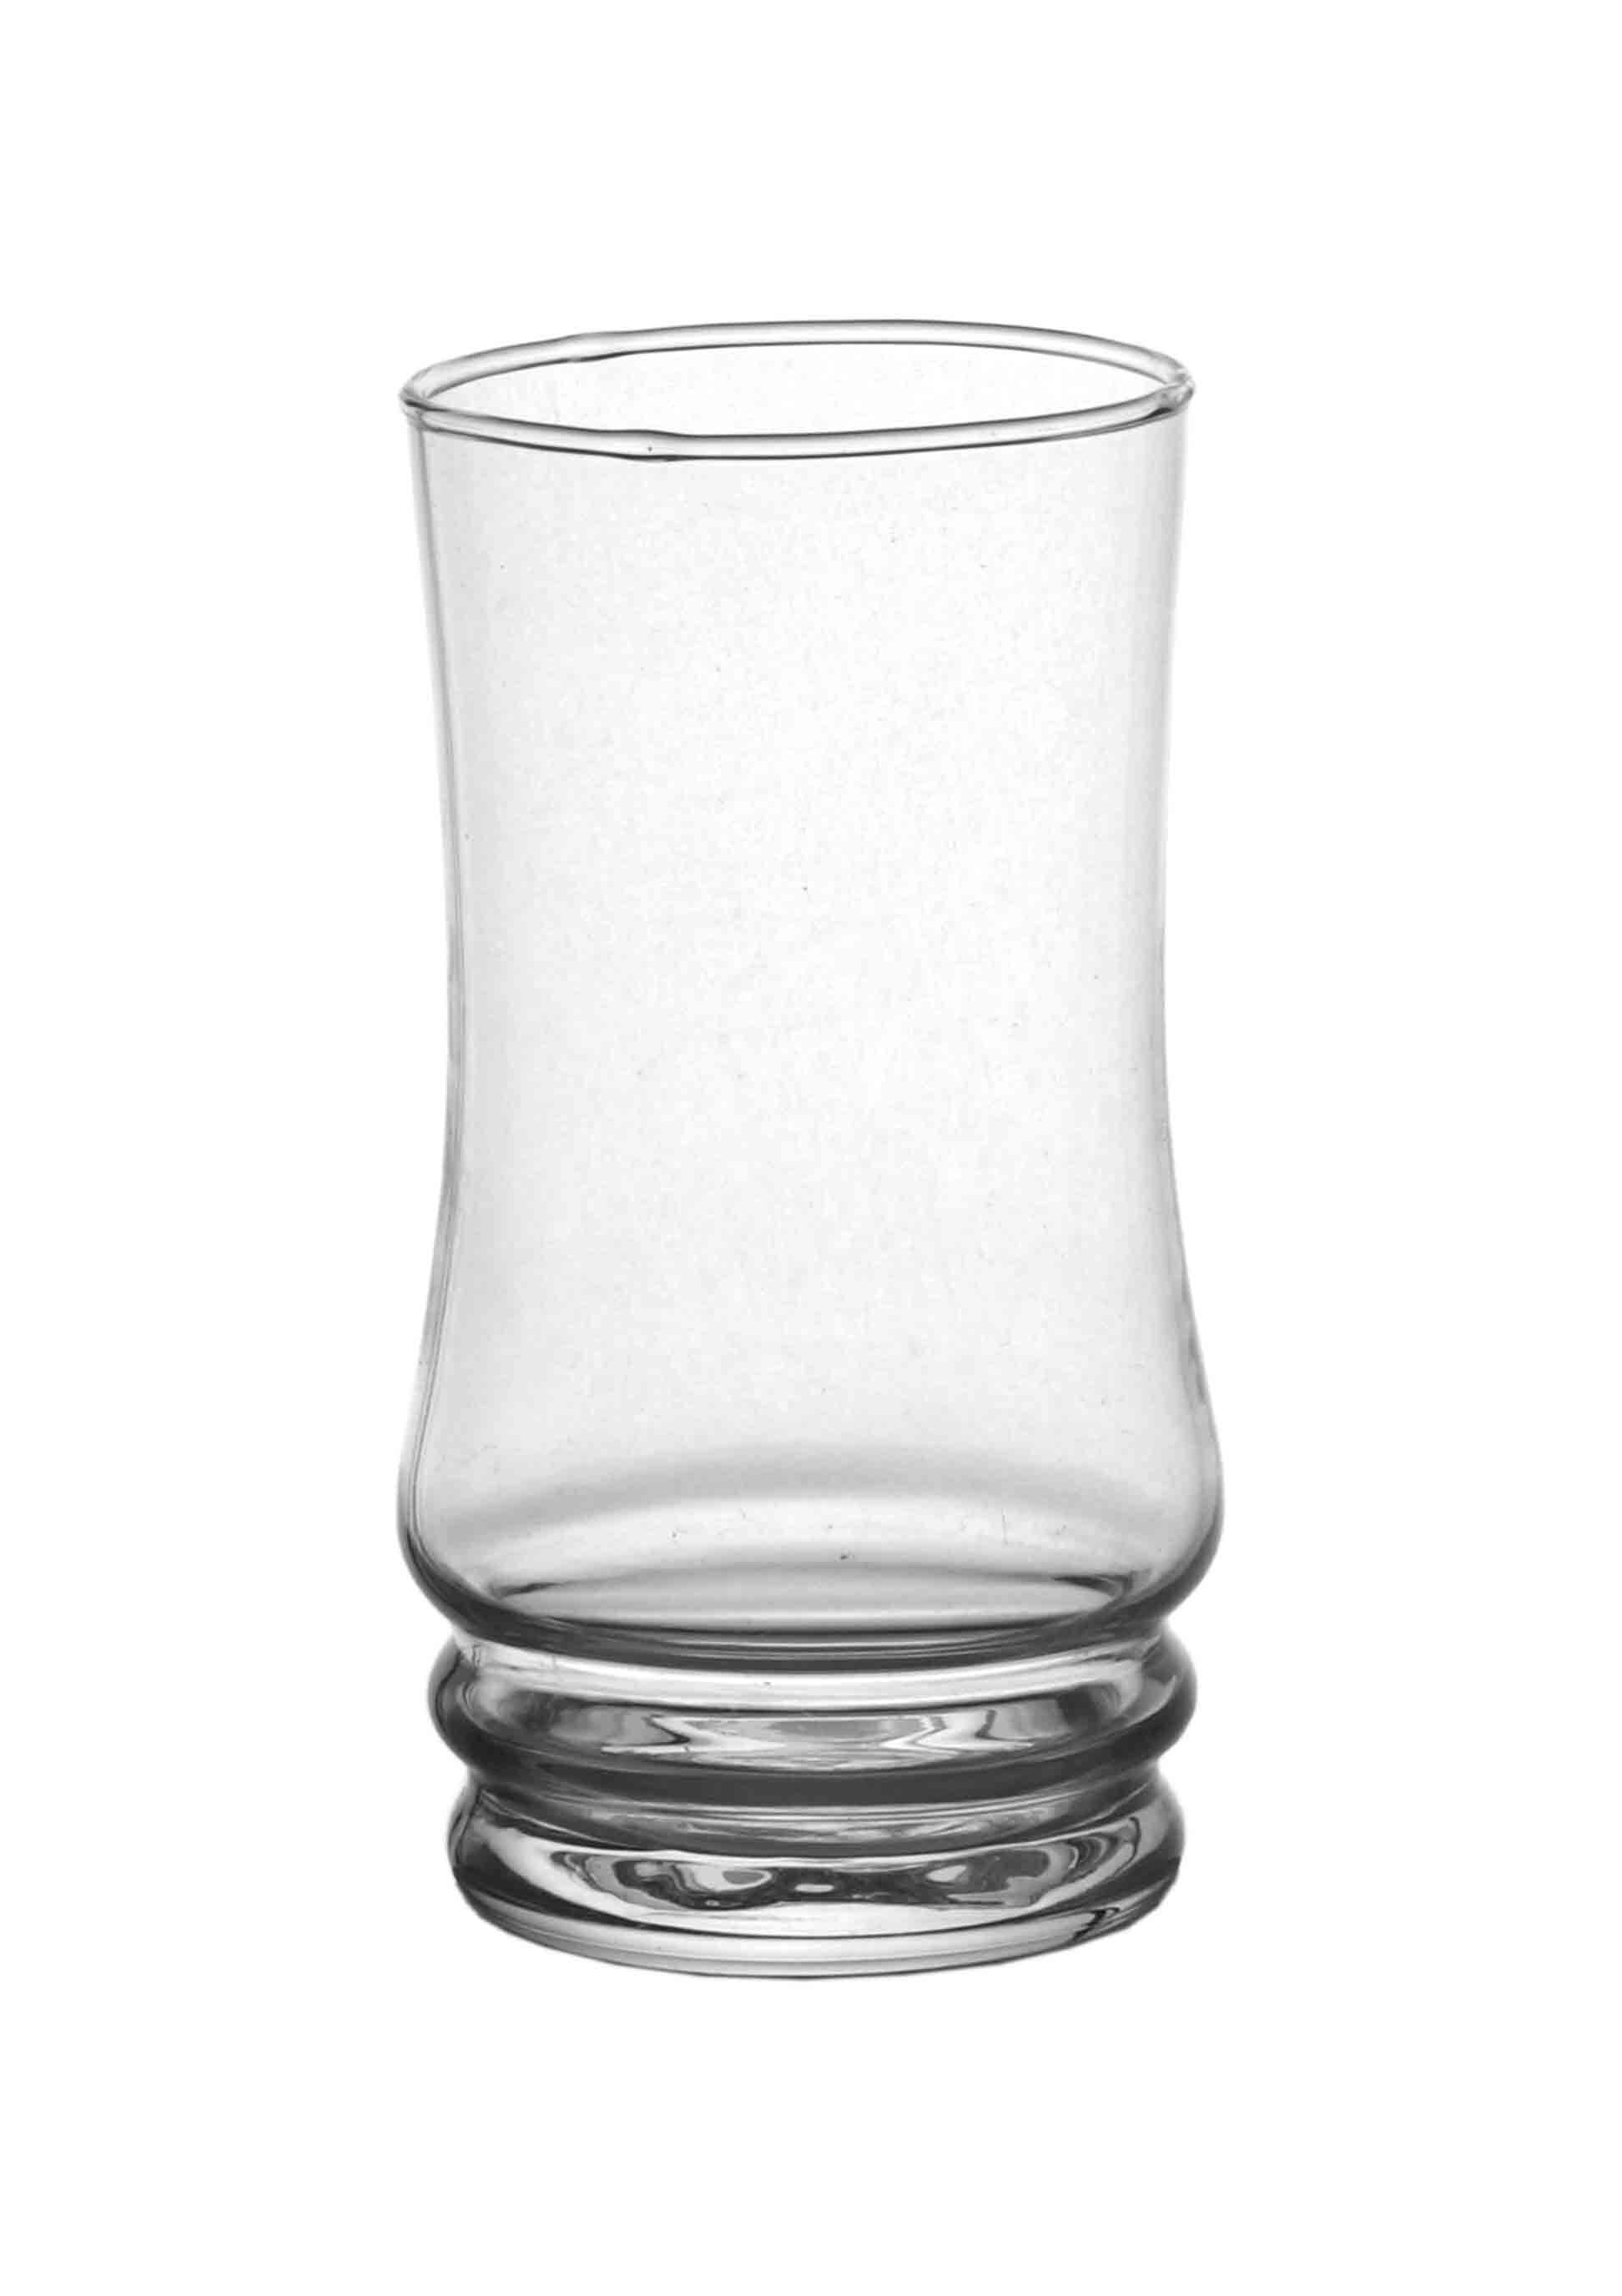 8 OZ Fancy Glass Tulip Tumblers Mouth Blowing